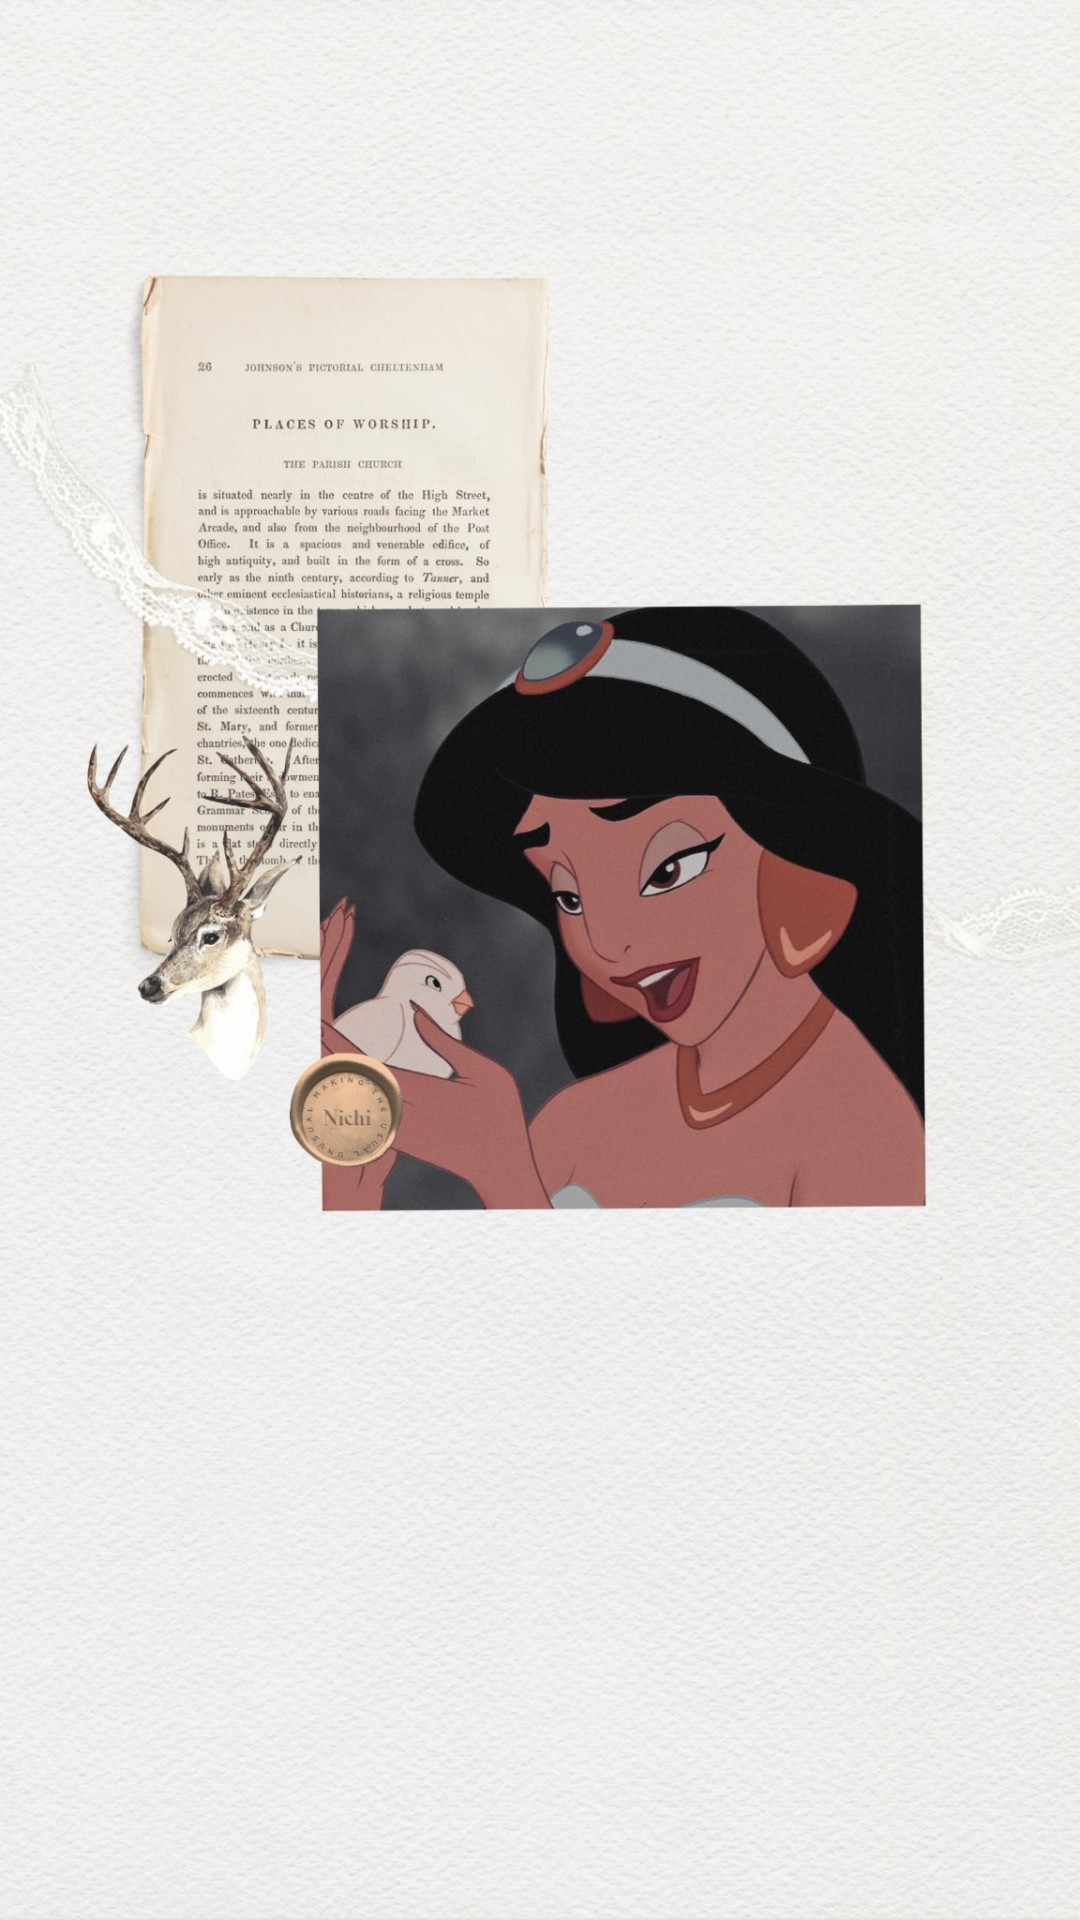 A collage of Jasmine from Aladdin, a page from a book, a necklace with a deer head charm, and a coin with the word 